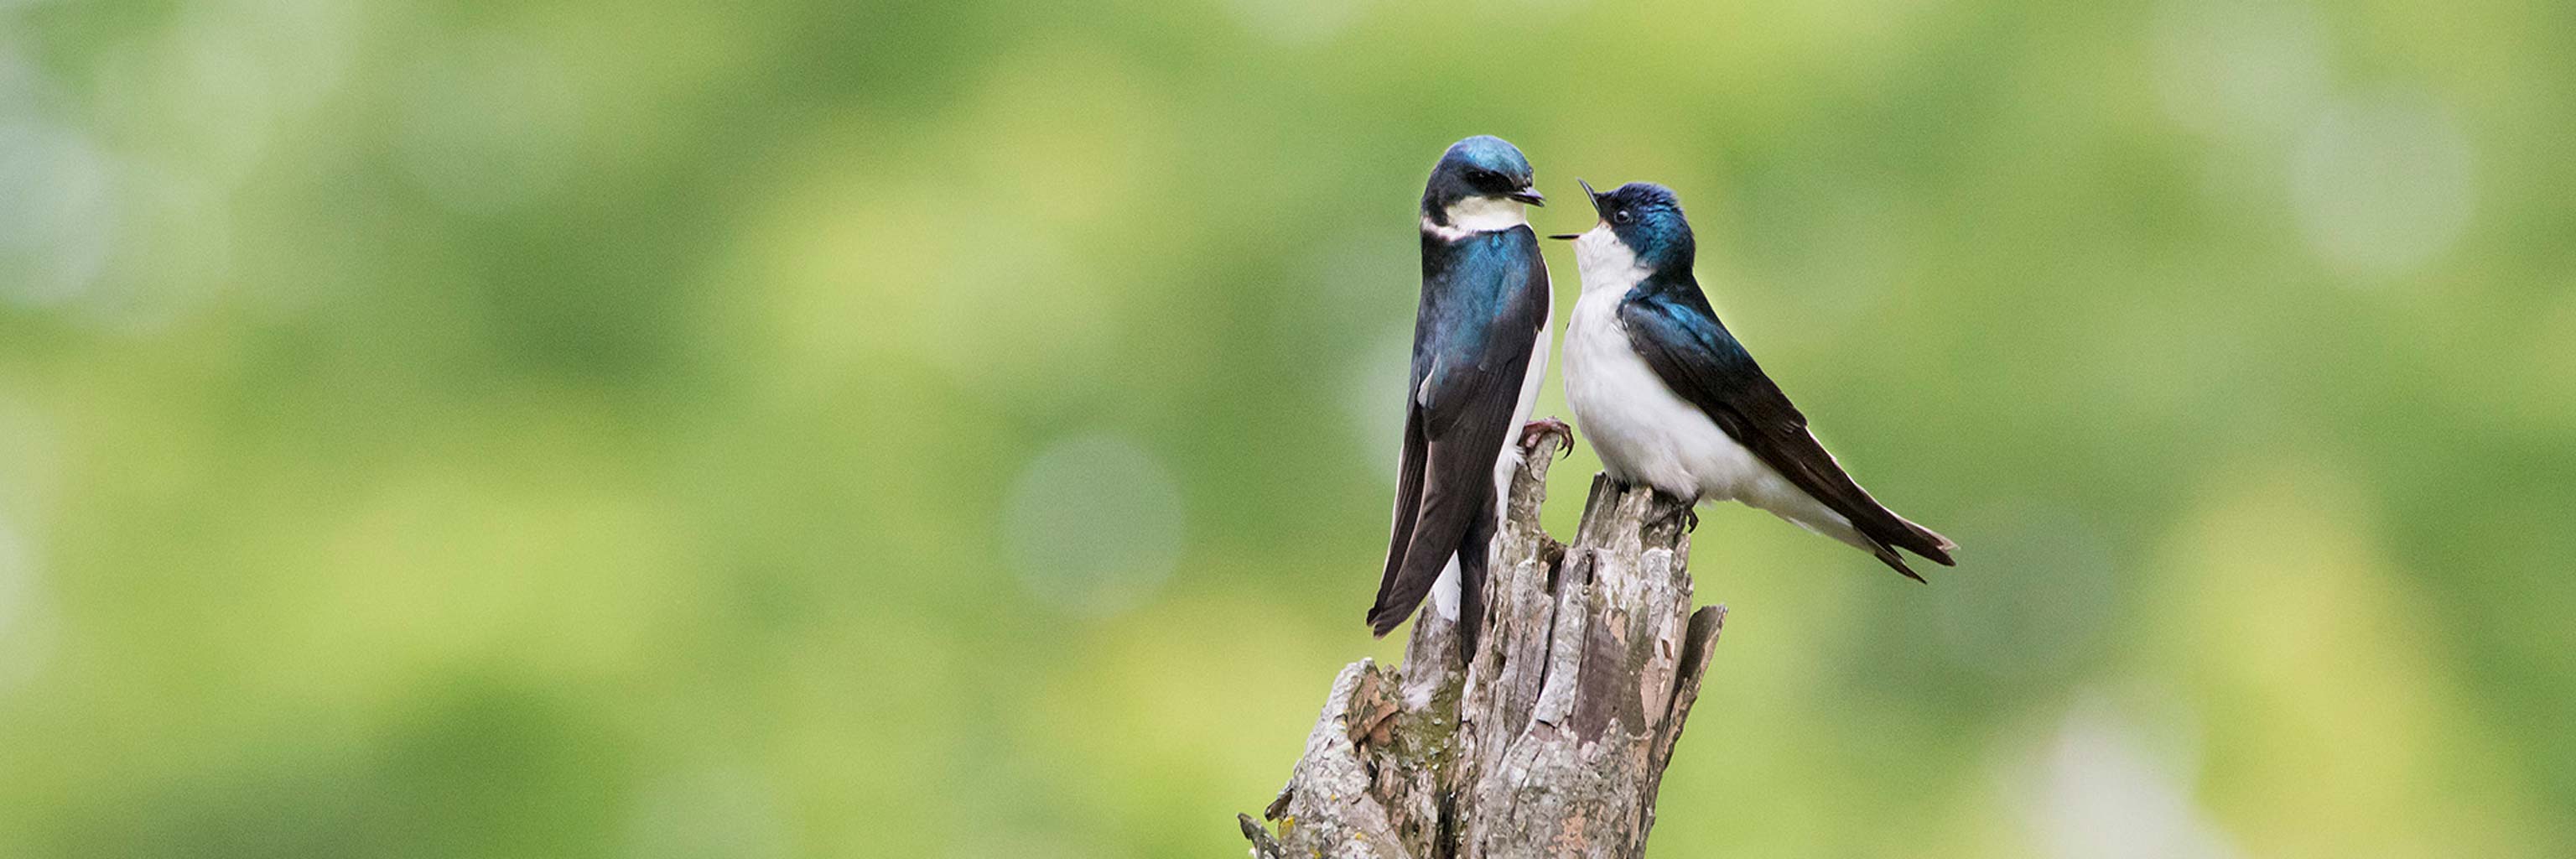 Two birds on a log